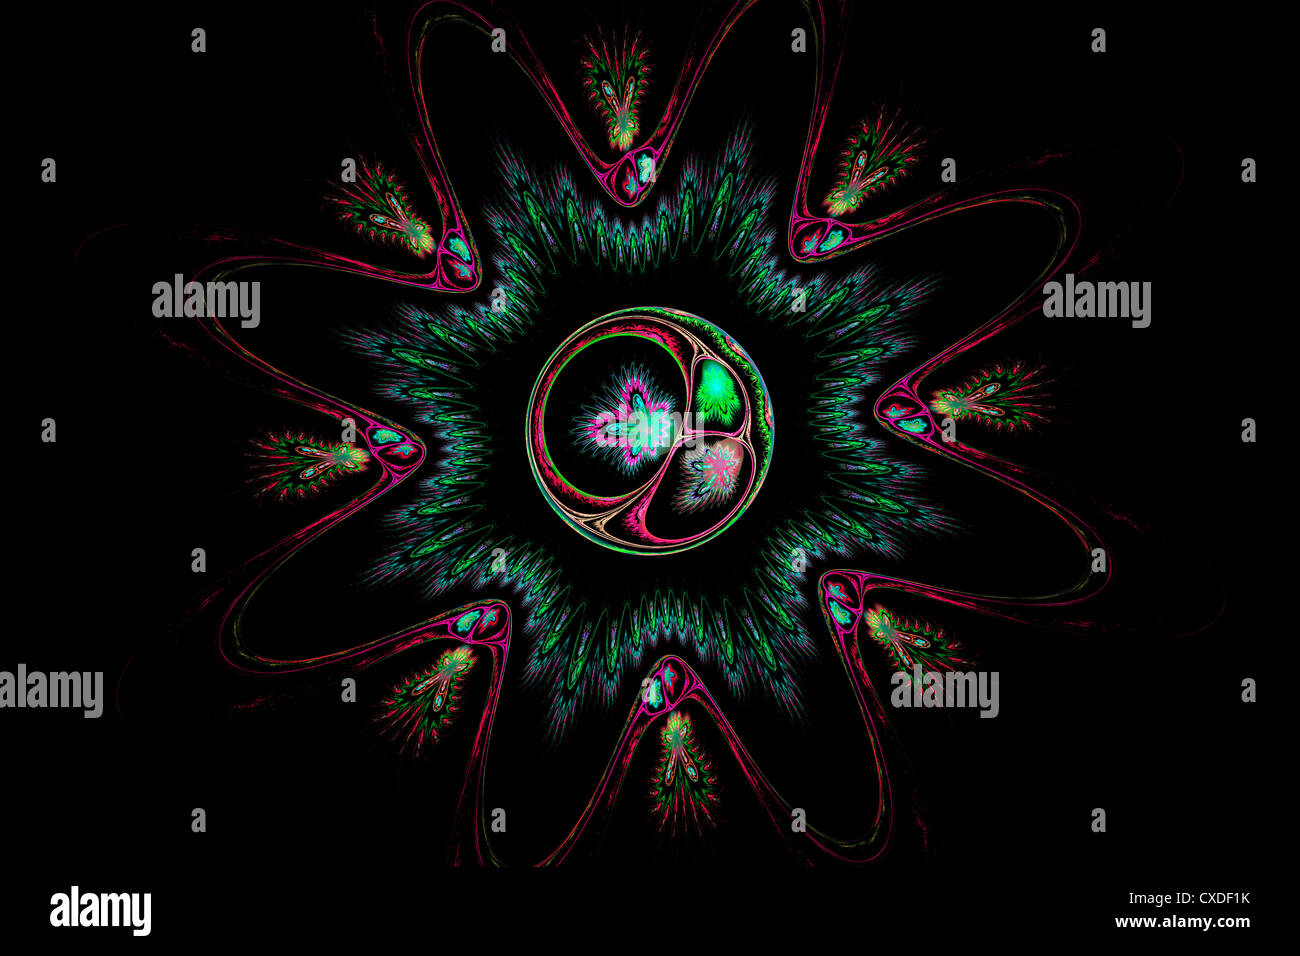 Abstract flower fractal flame on black background. Stock Photo